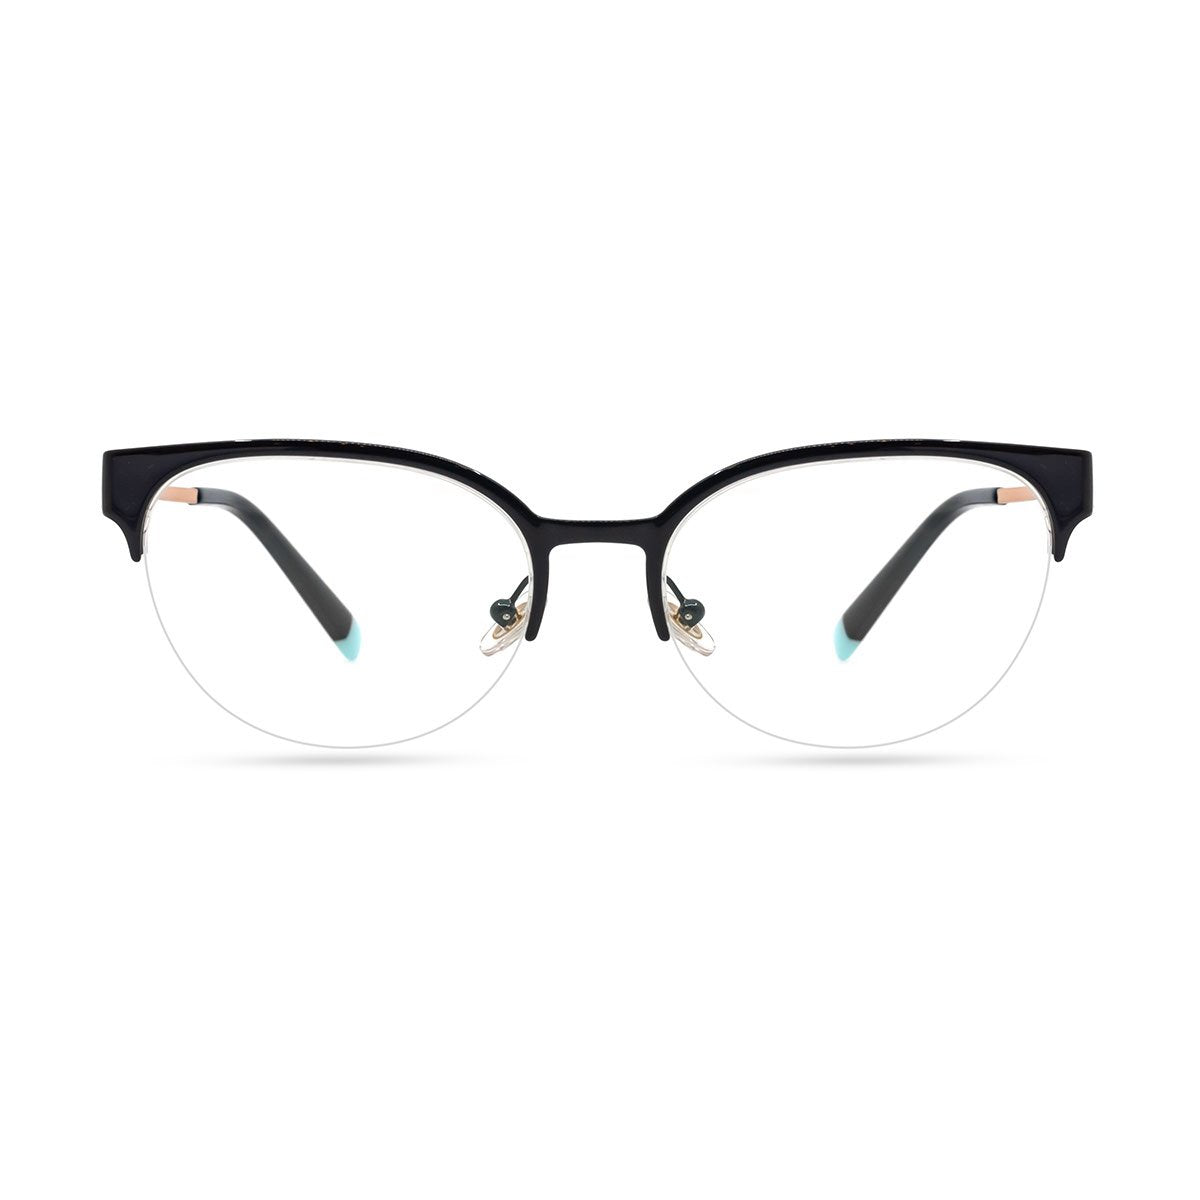 TIFFANY & CO TF 1133 6007 spectacle-frame